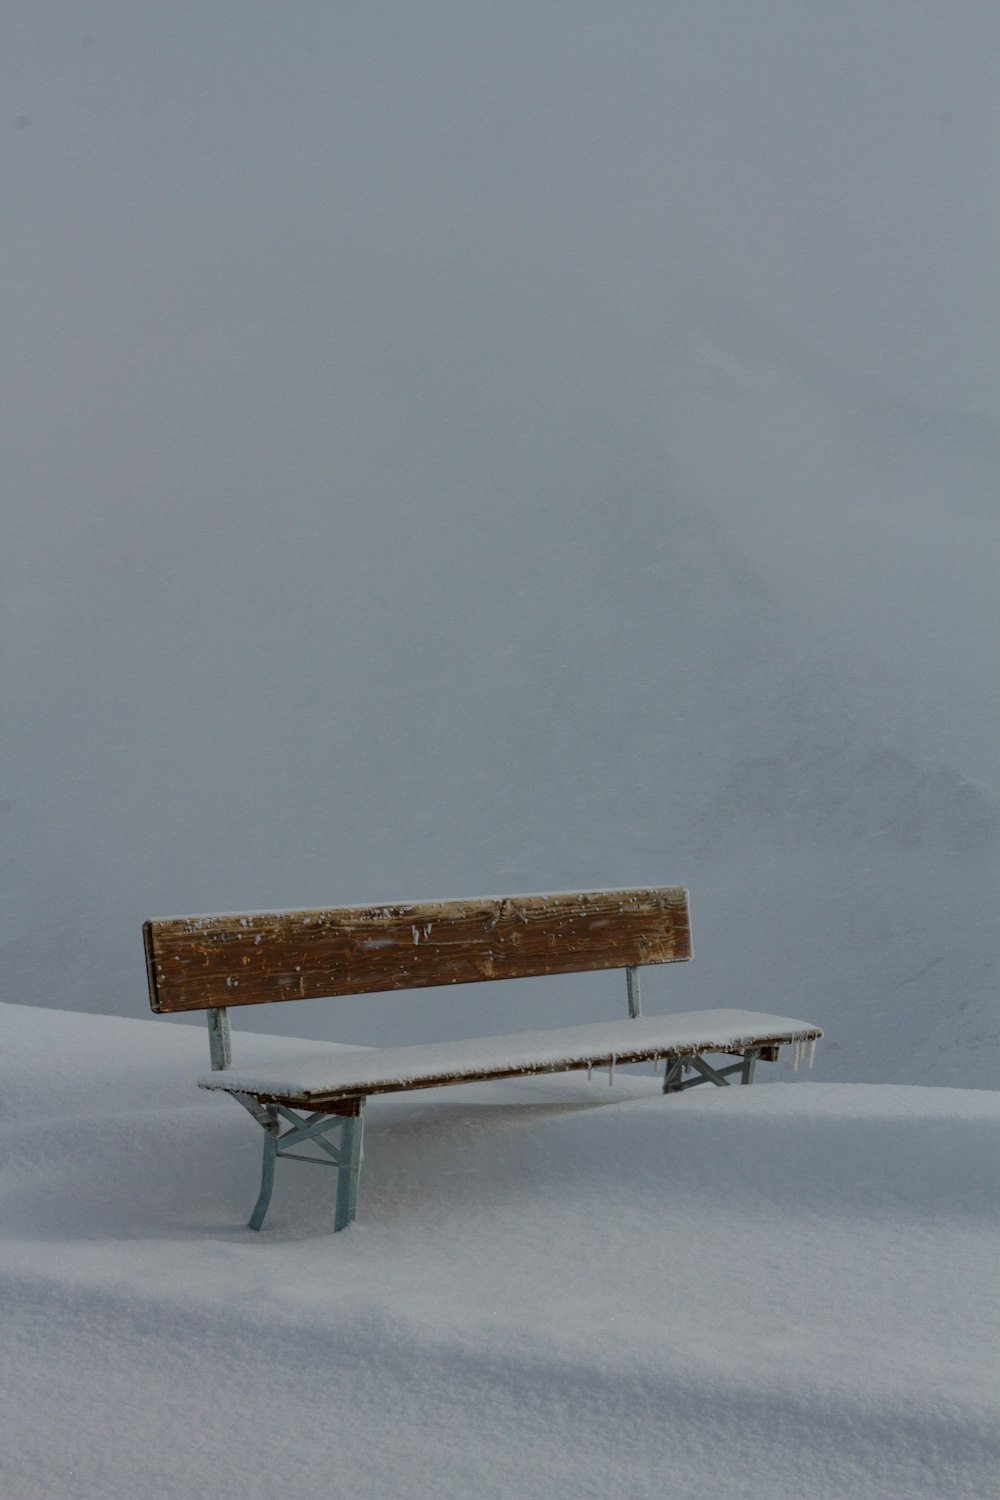 a wooden bench sitting in the middle of a snow covered field